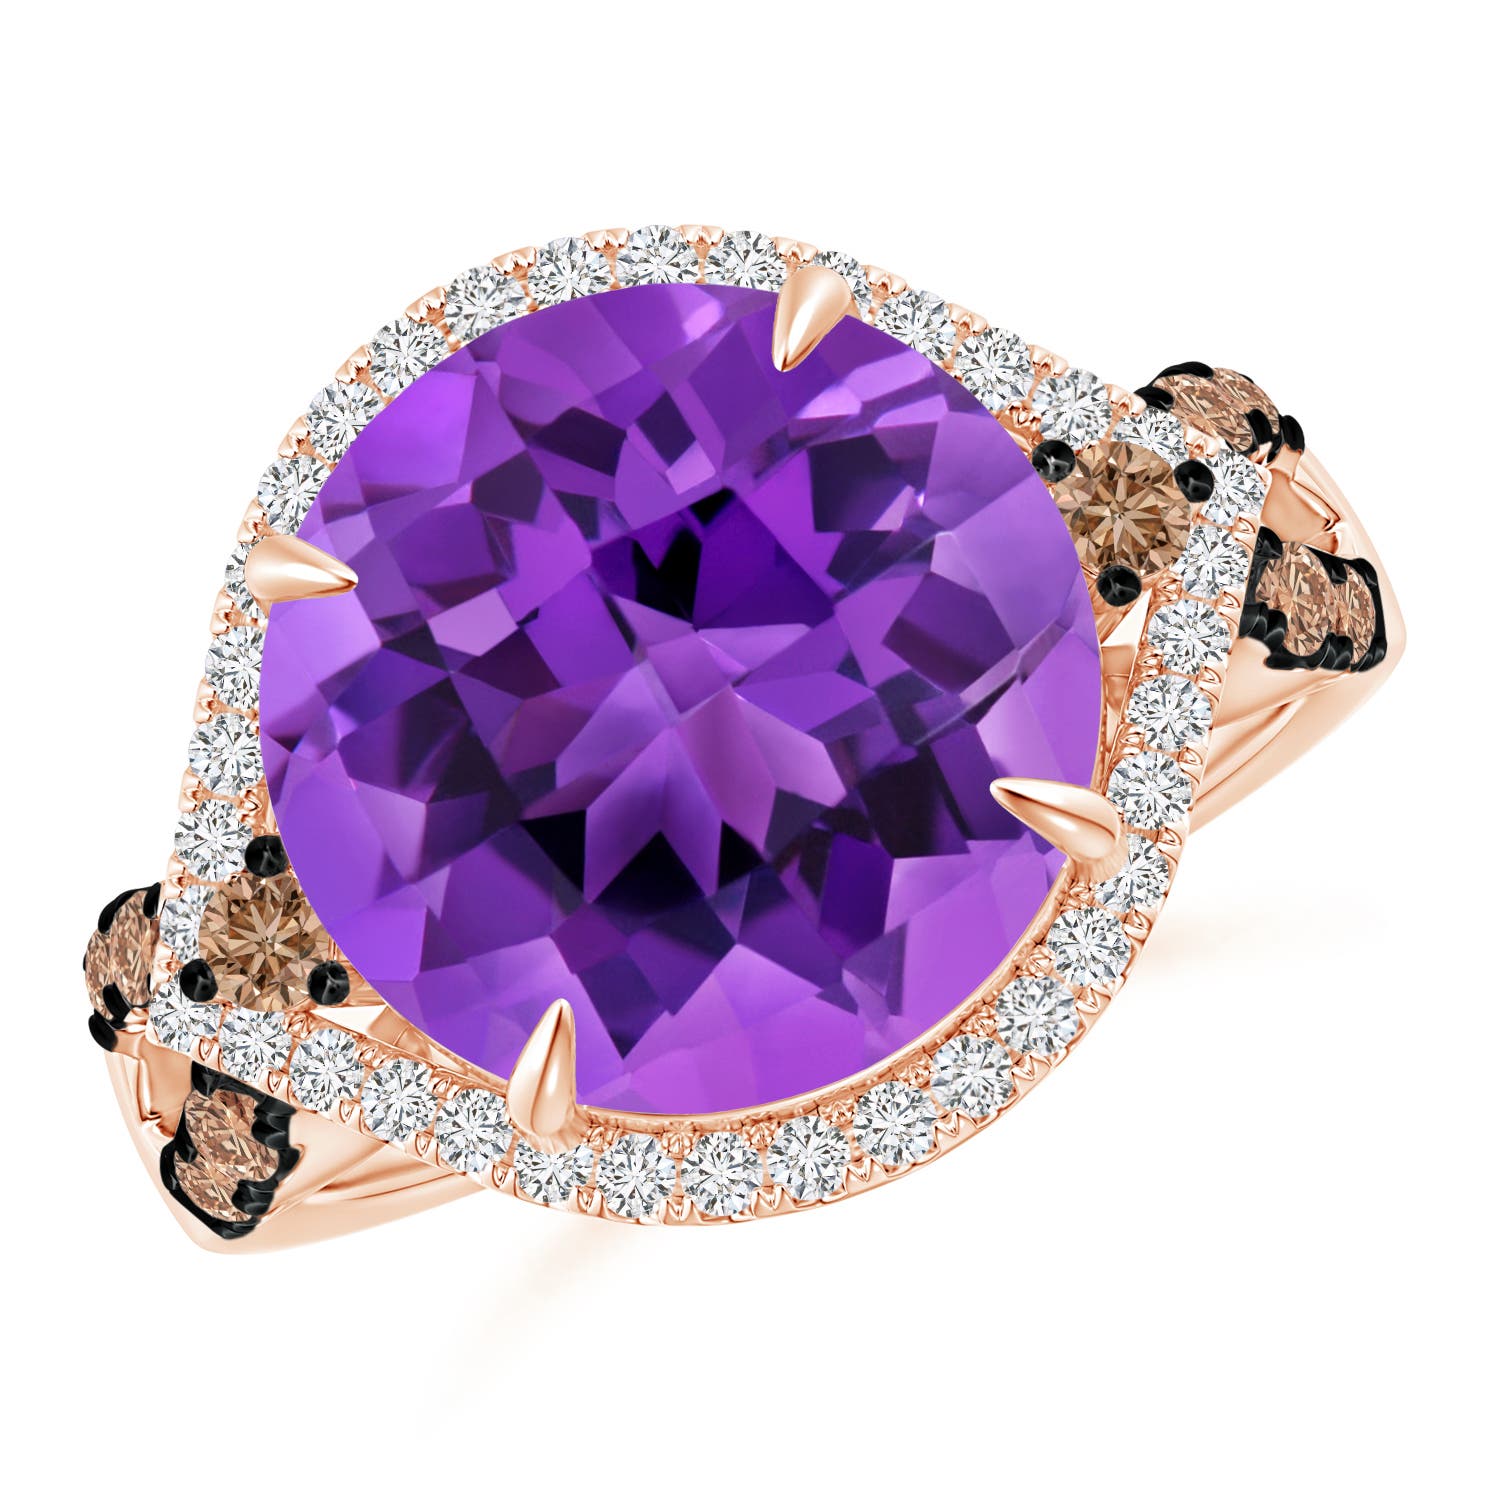 AAA - Amethyst / 6.4 CT / 14 KT Rose Gold